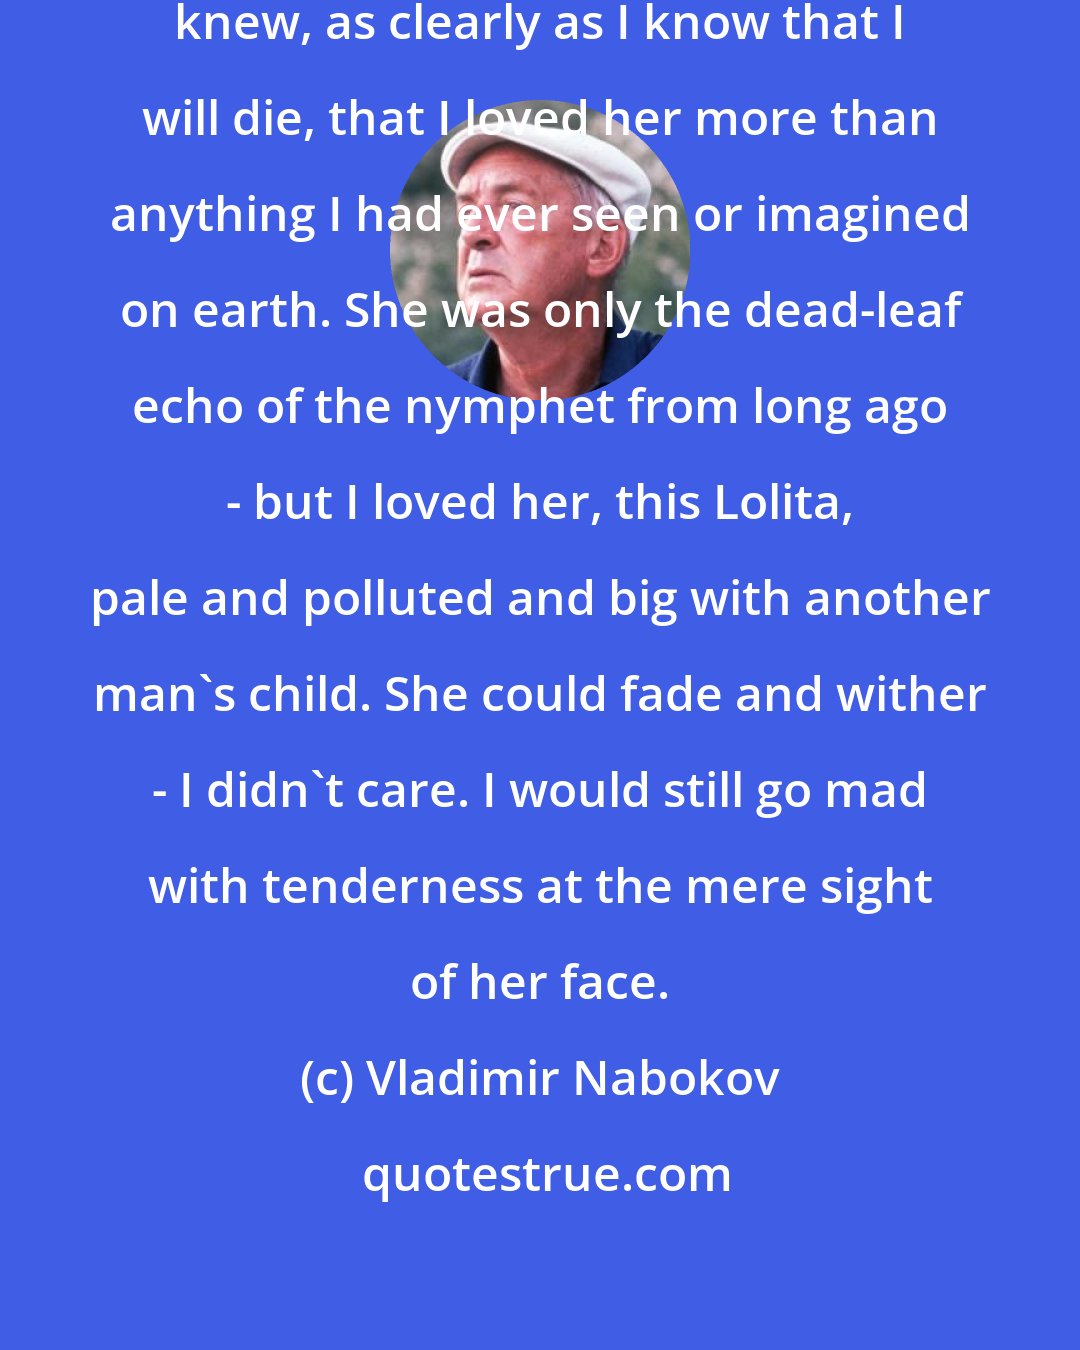 Vladimir Nabokov: I looked and looked at her, and I knew, as clearly as I know that I will die, that I loved her more than anything I had ever seen or imagined on earth. She was only the dead-leaf echo of the nymphet from long ago - but I loved her, this Lolita, pale and polluted and big with another man's child. She could fade and wither - I didn't care. I would still go mad with tenderness at the mere sight of her face.